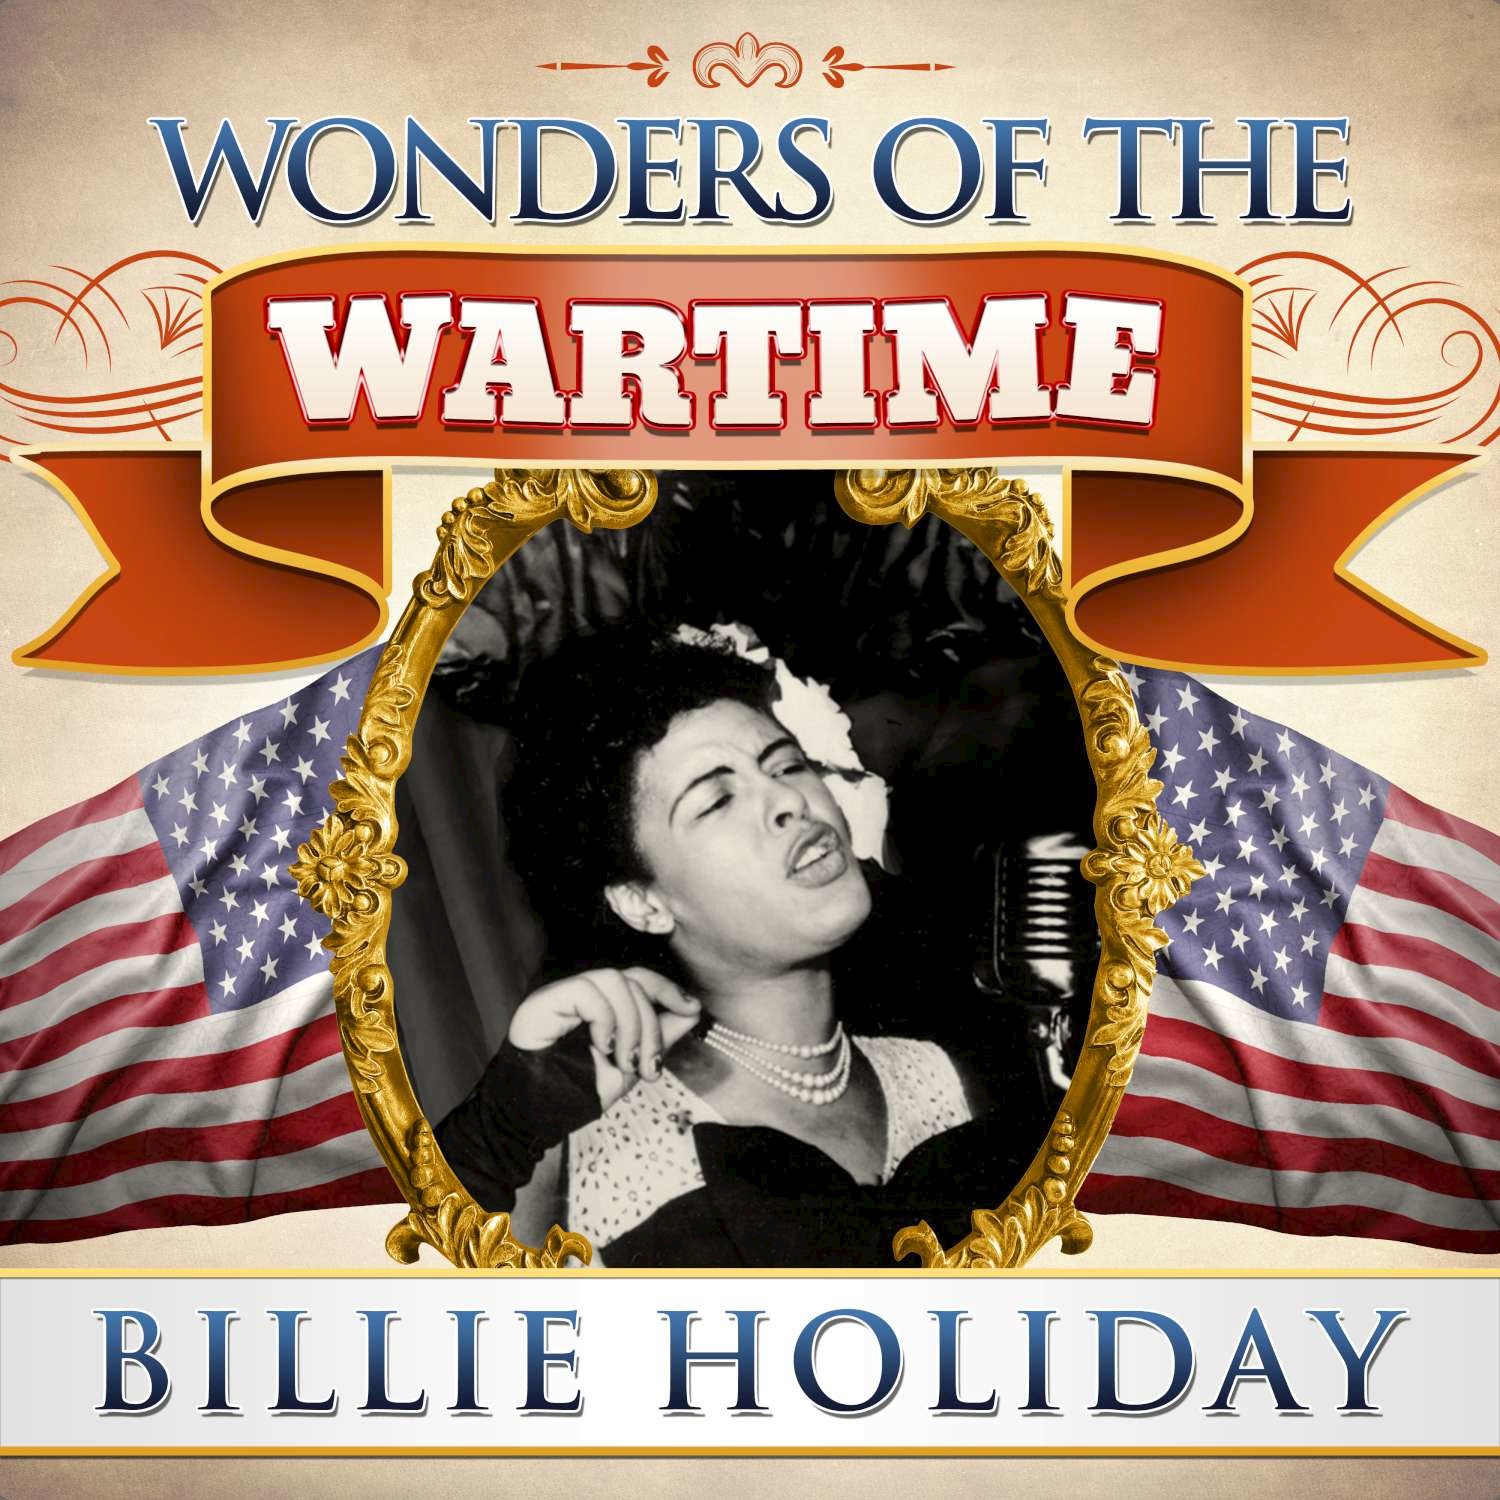 Wonders of the Wartime: Billie Holiday